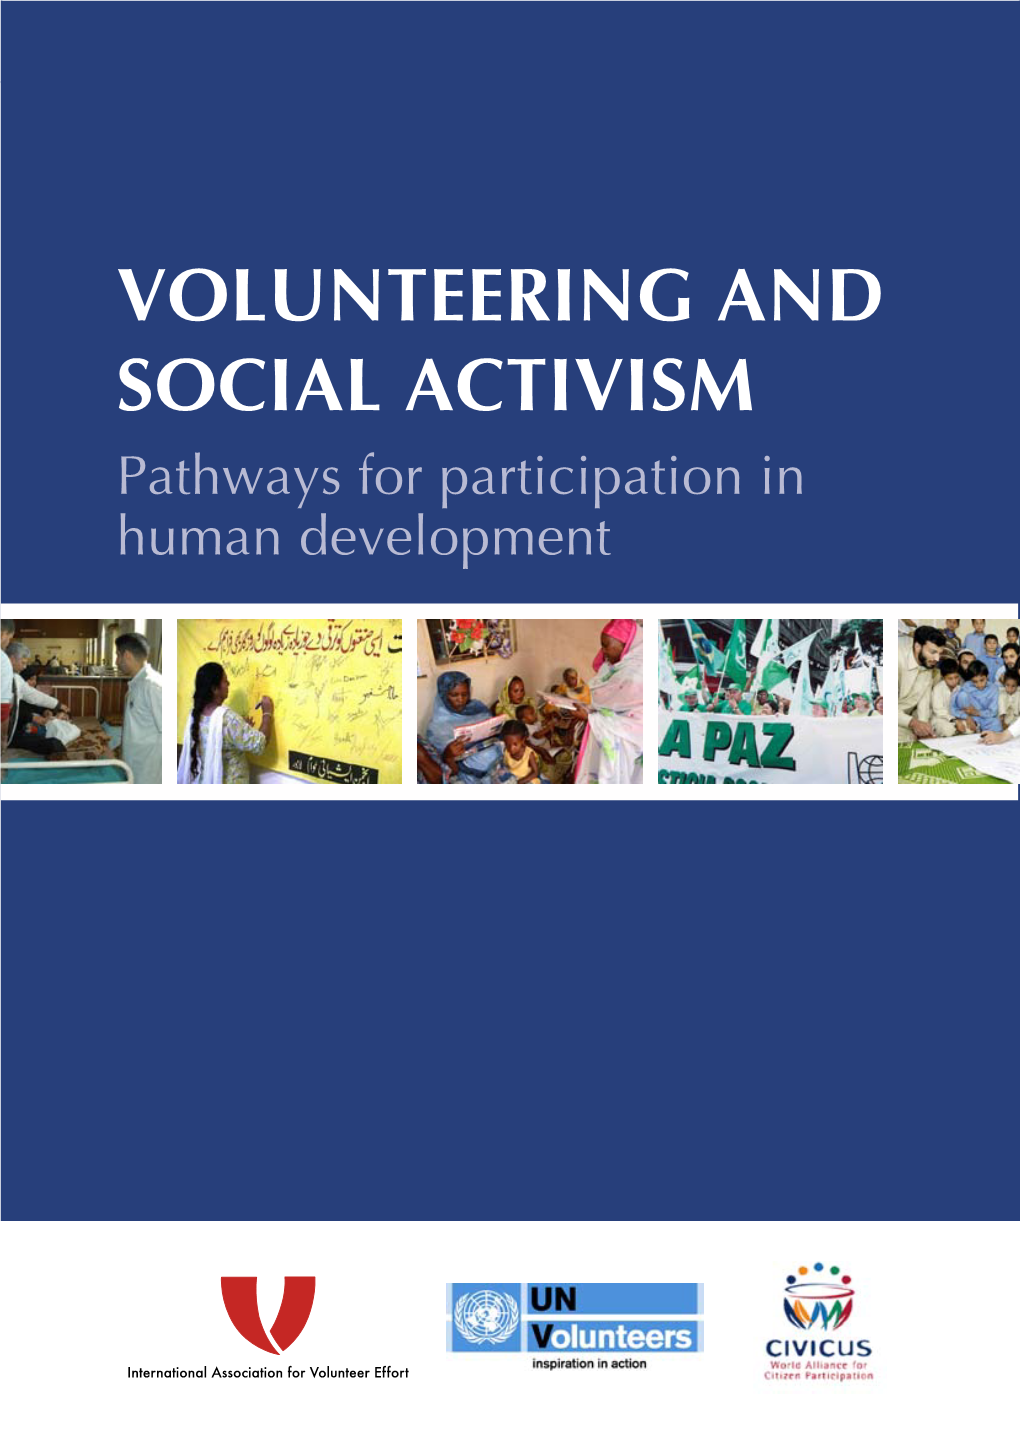 VOLUNTEERING and SOCIAL ACTIVISM Pathways for Participation in Human Development